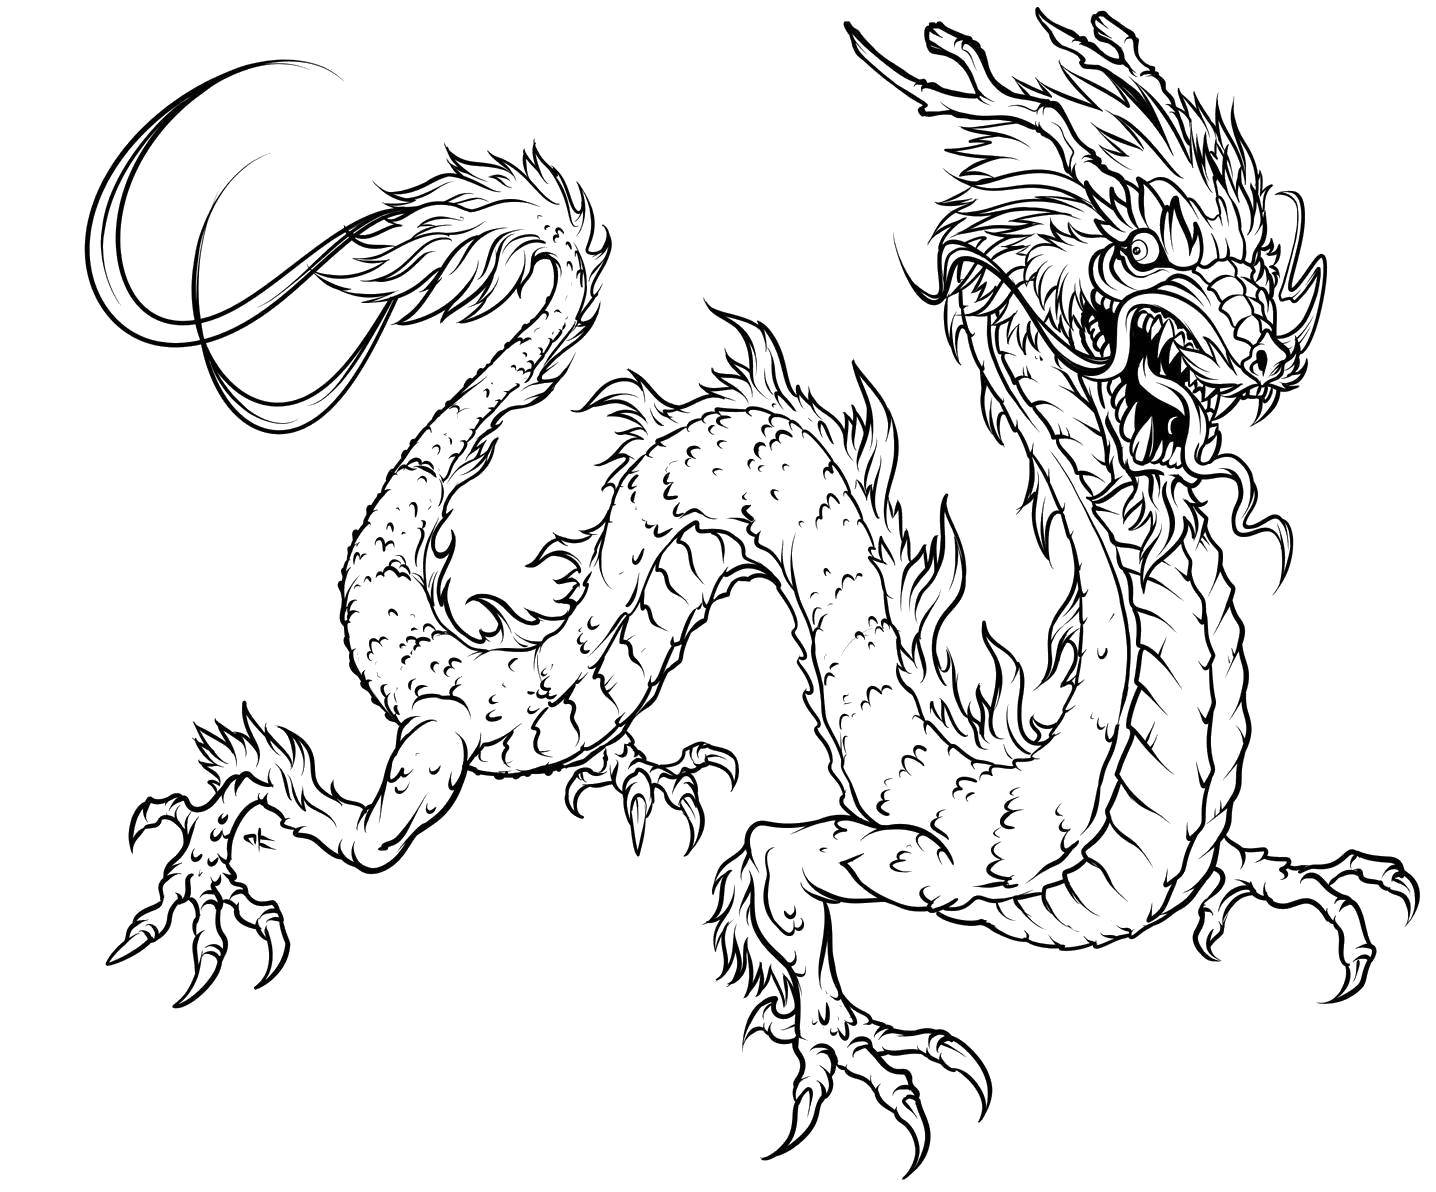 Coloring Chinese dragon in fury. Category Dragons. Tags:  Dragons.